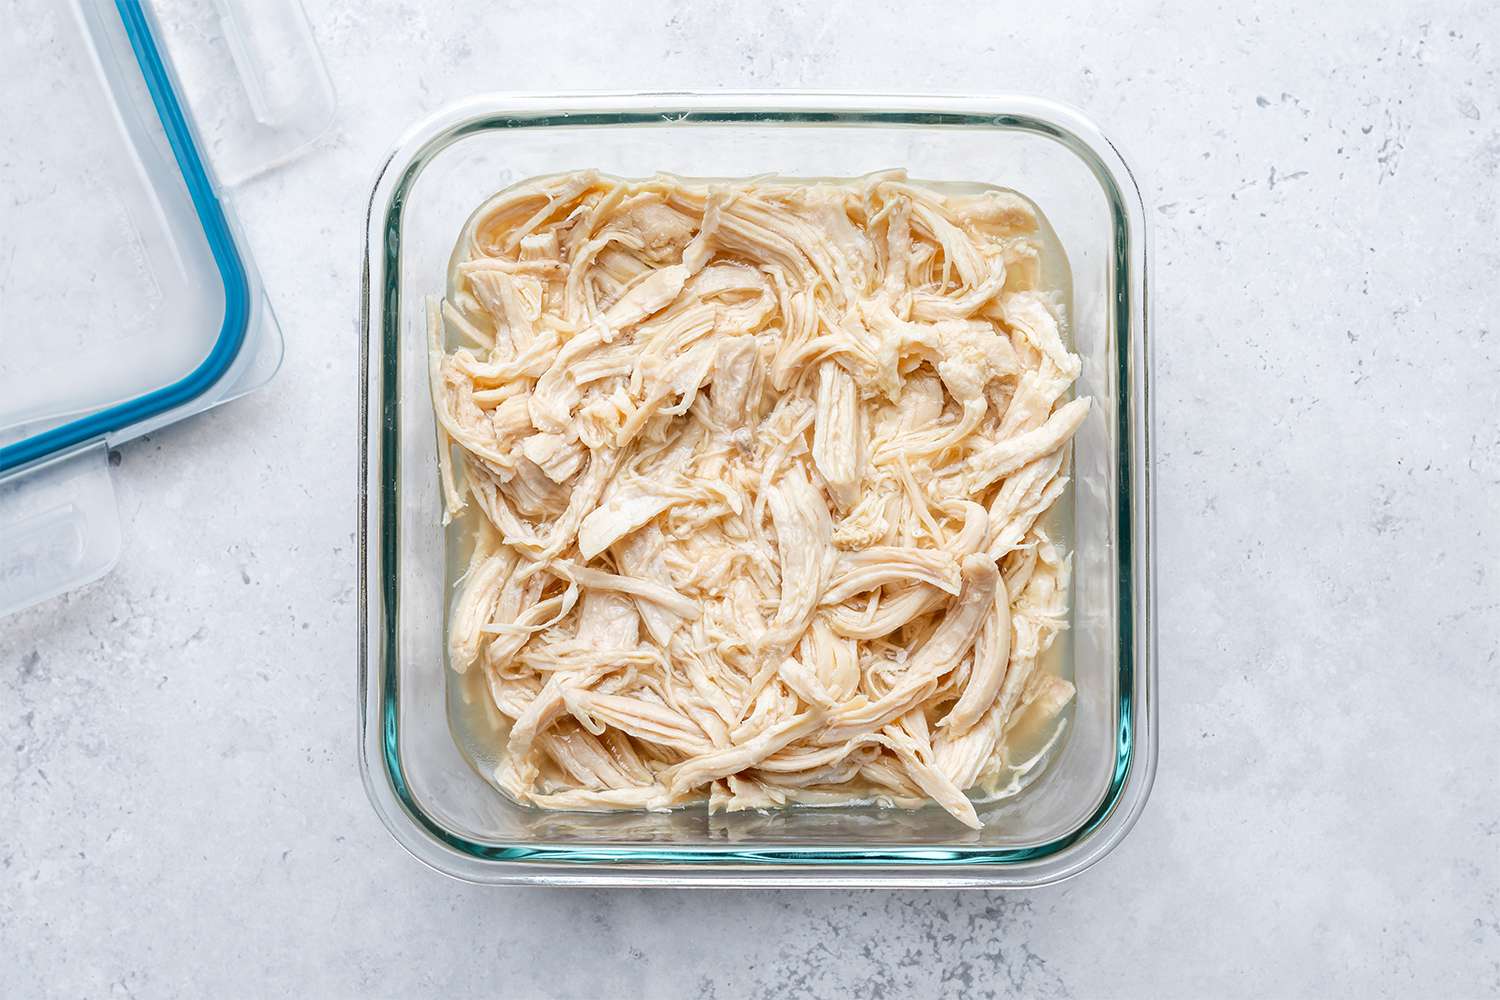 Shredded chicken in broth in a glass container